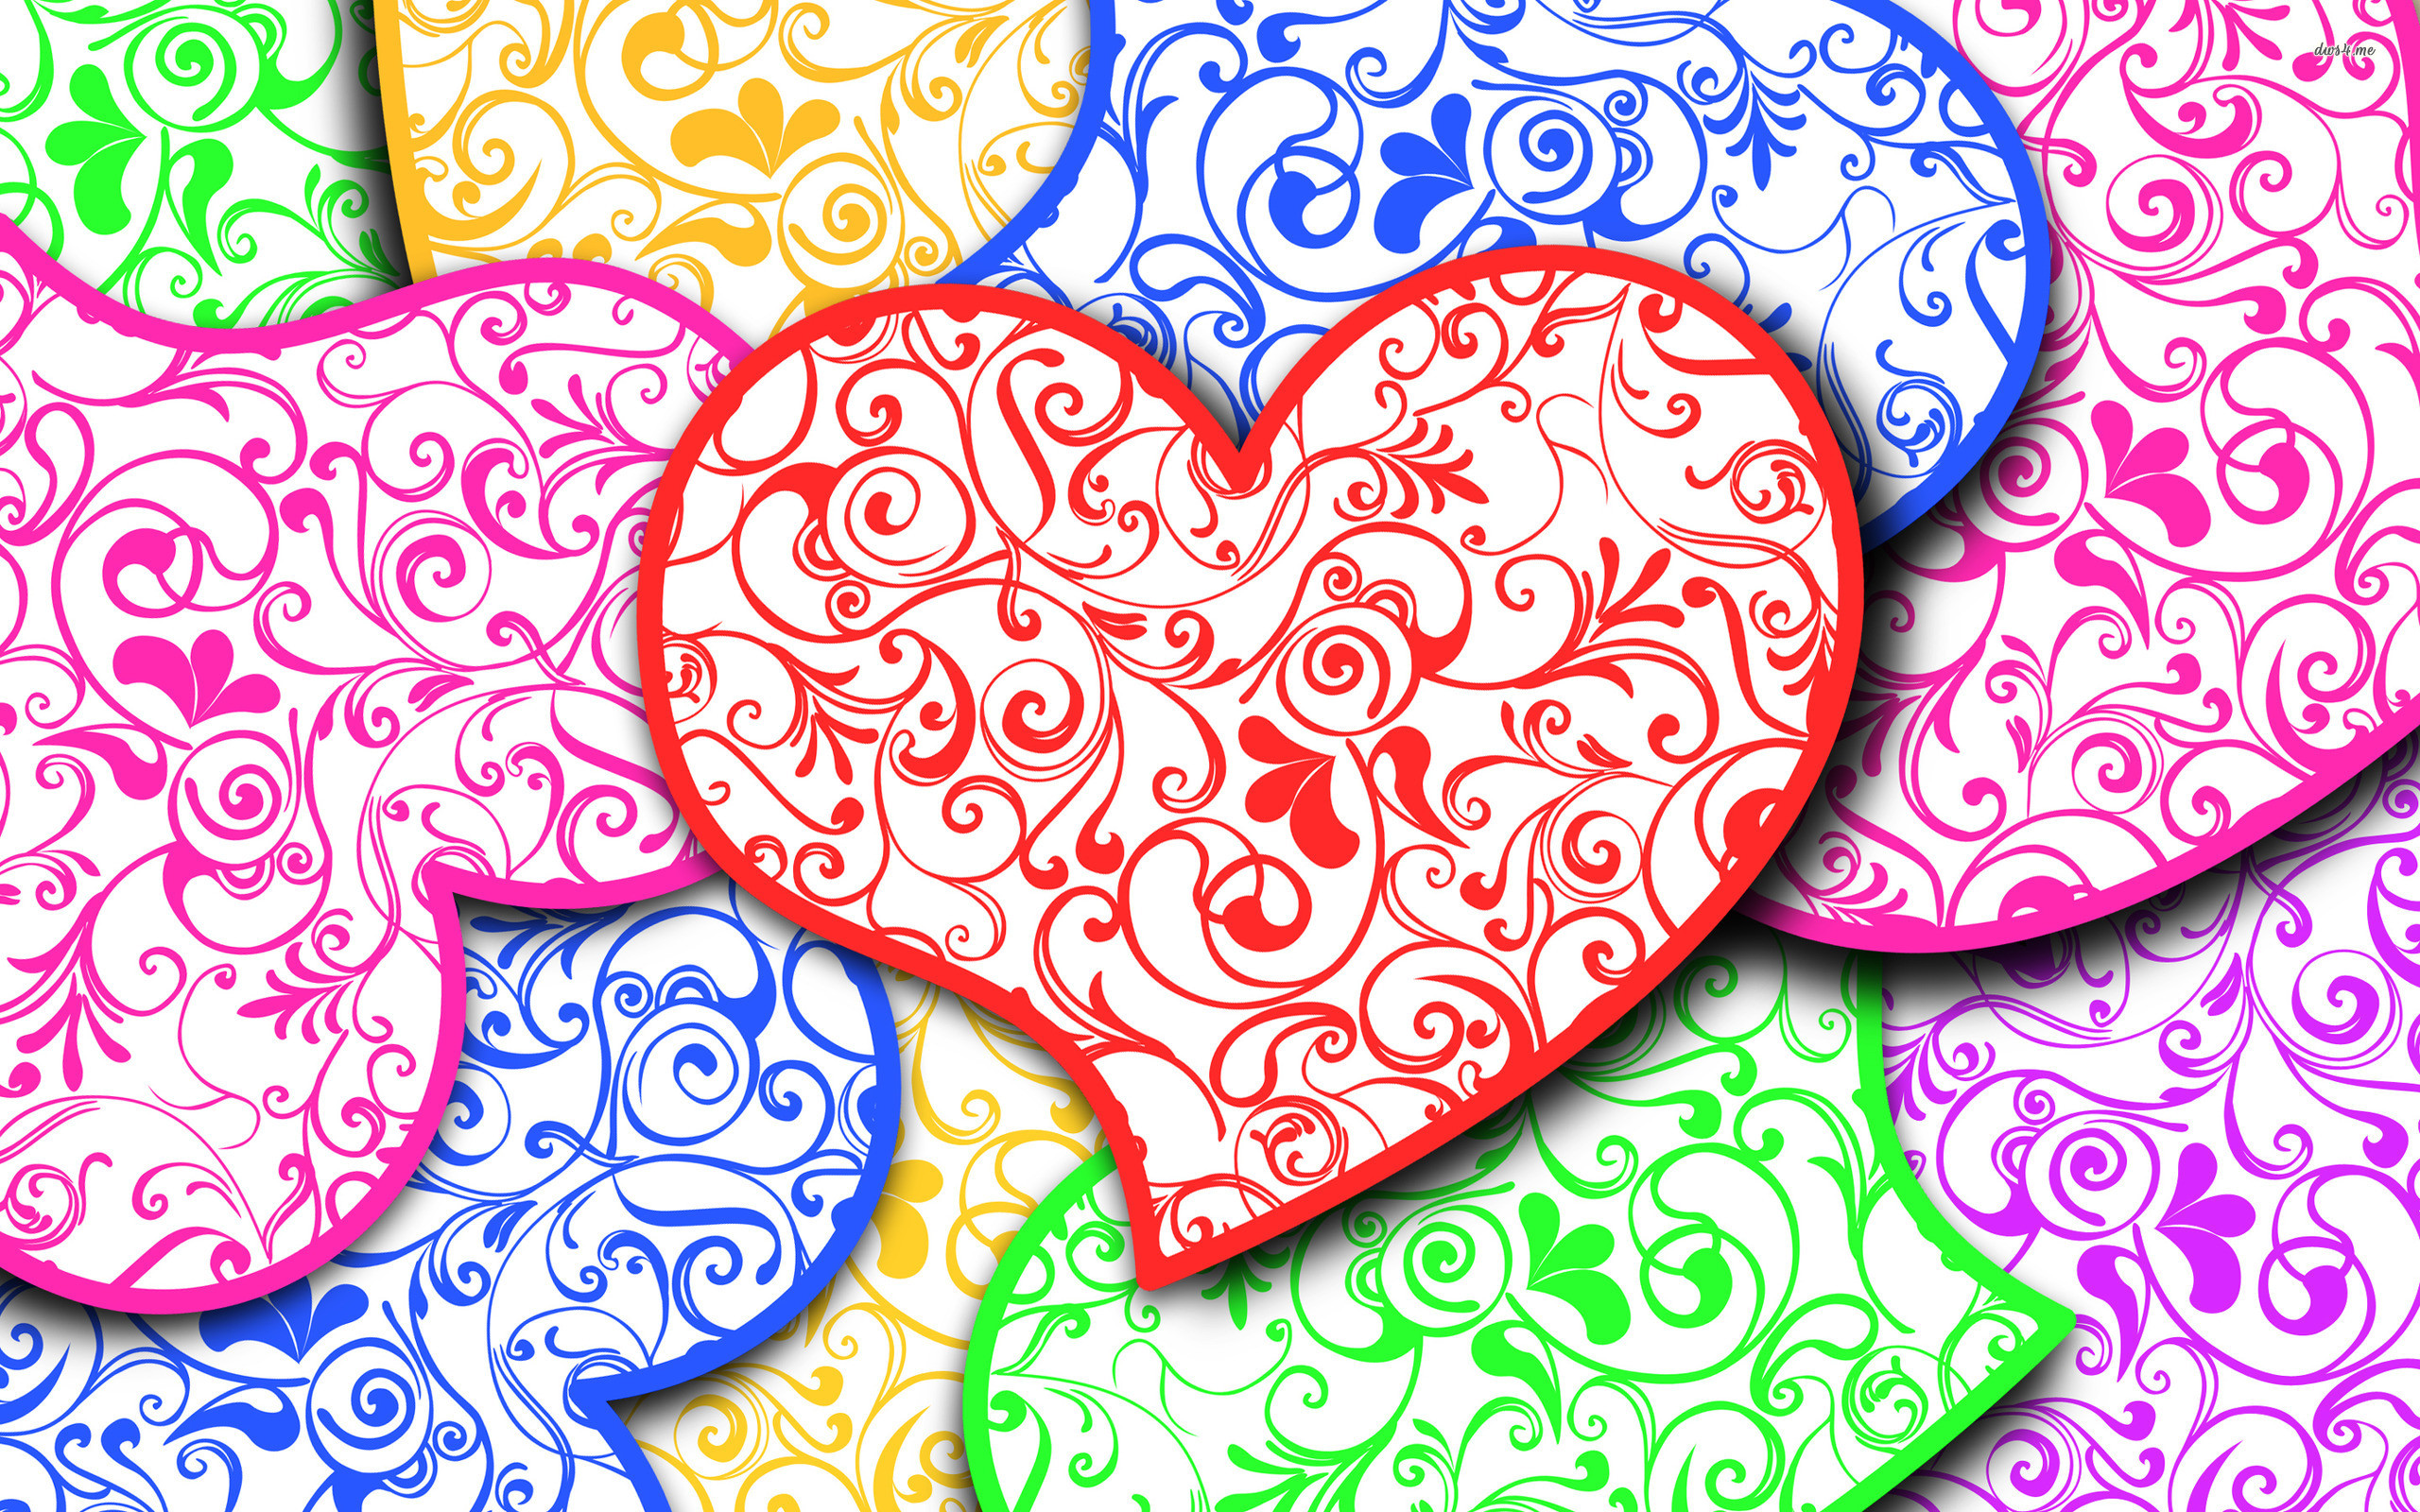 2560x1600 COLORFUL HEARTS WALLPAPER – 1. DOWNLOAD